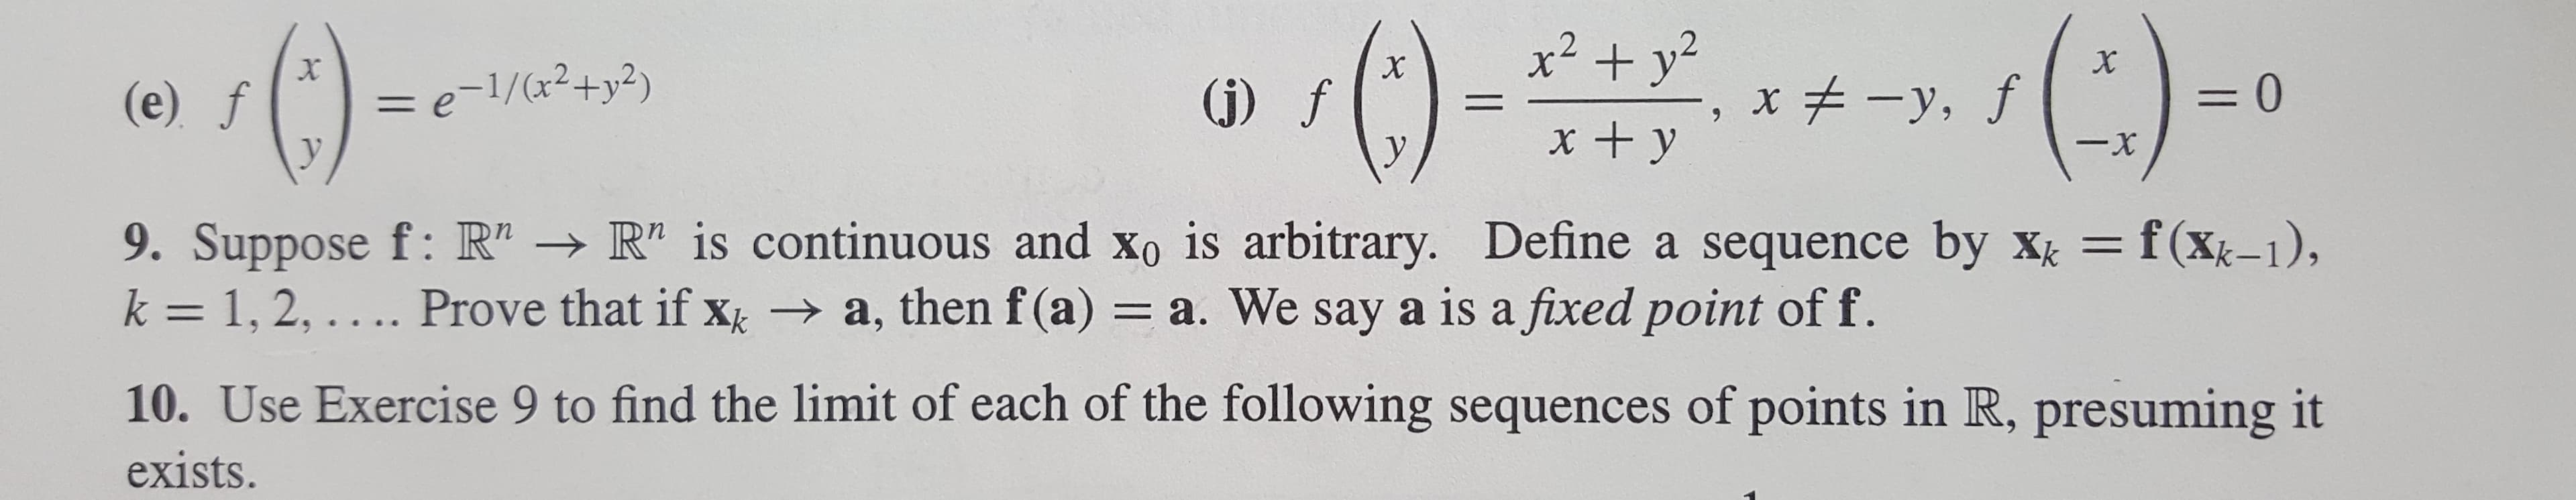 x2 +y
x
, f
X
= e-1/(x2+y2)
= 0
(j) f
(e) f
1
x + y
-x
y
9. Suppose f: R" R" is continuous and Xo is arbitrary. Define a sequence by xk f(Xk-1),
k 1, 2,.... Prove that if x a, then f (a) = a. We say a is a fixed point of f.
10. Use Exercise 9 to find the limit of each of the following sequences of points in R, presuming it
exists.
